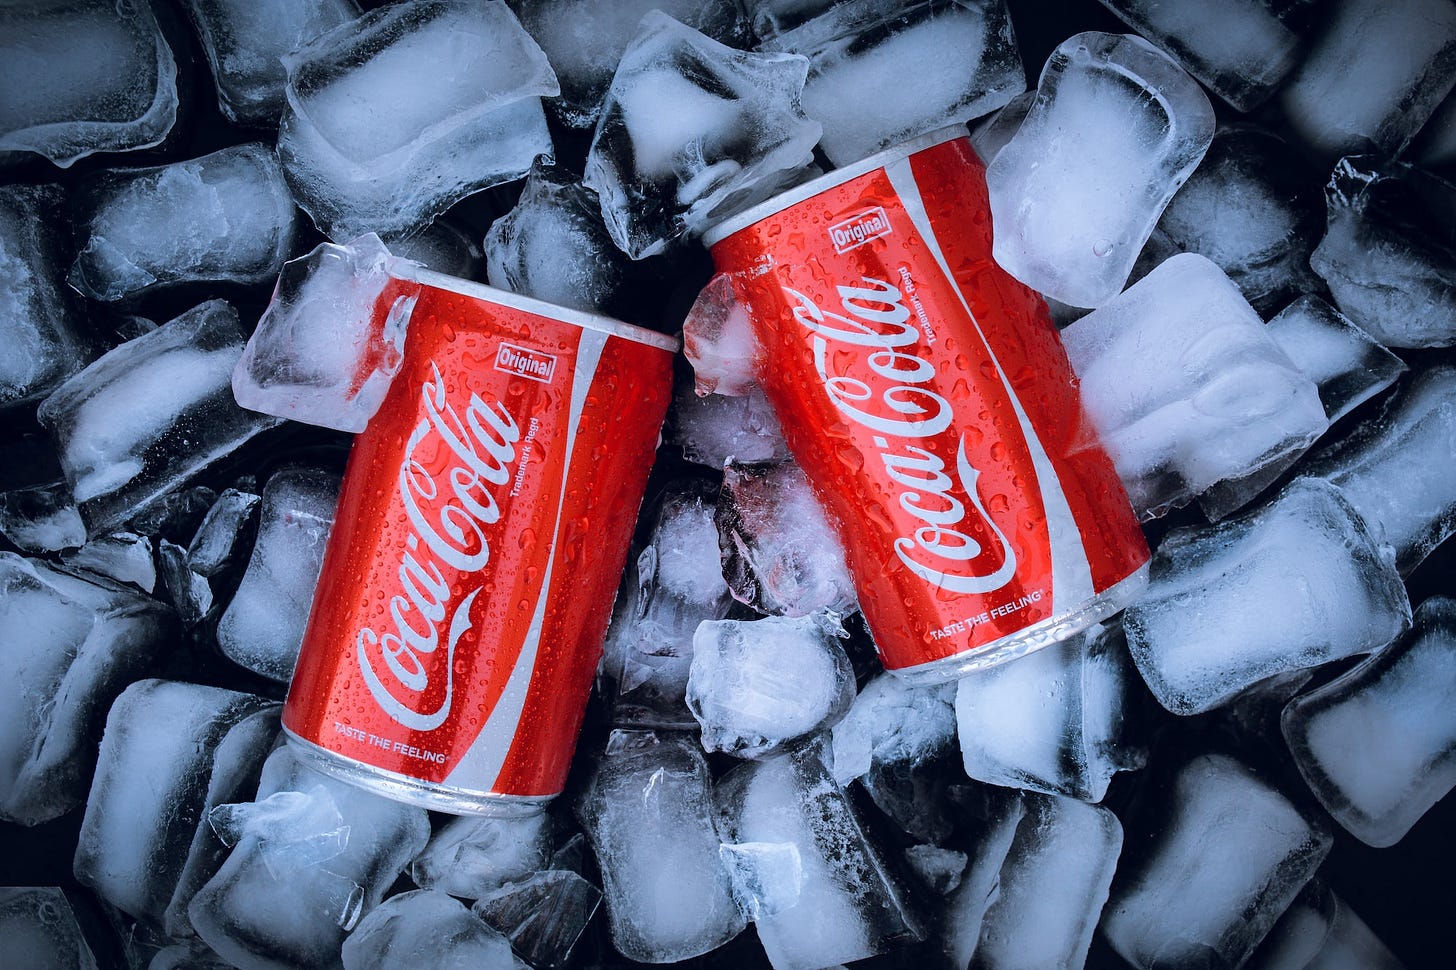 No price rollbacks. Coca-Cola says high prices are here to stay.